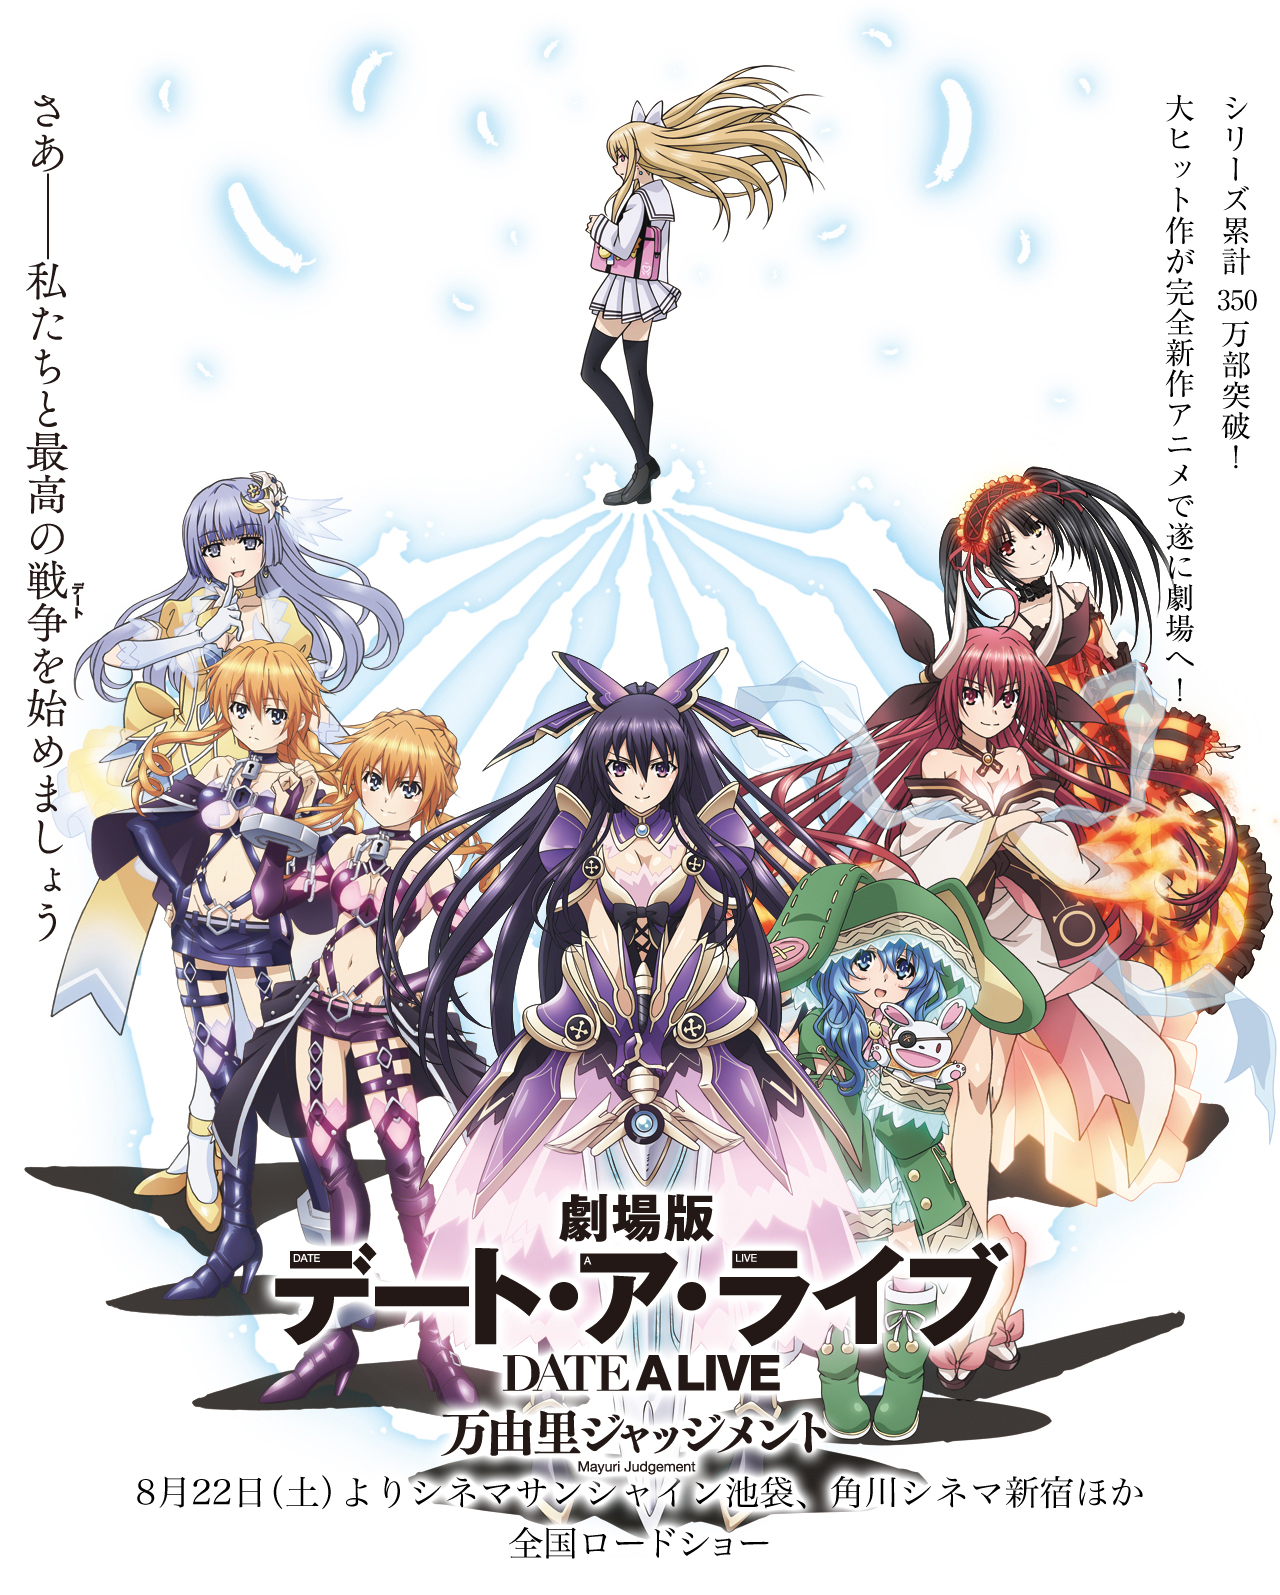 Date A Live Movie: Mayuri Judgment anime film nyeste trailer